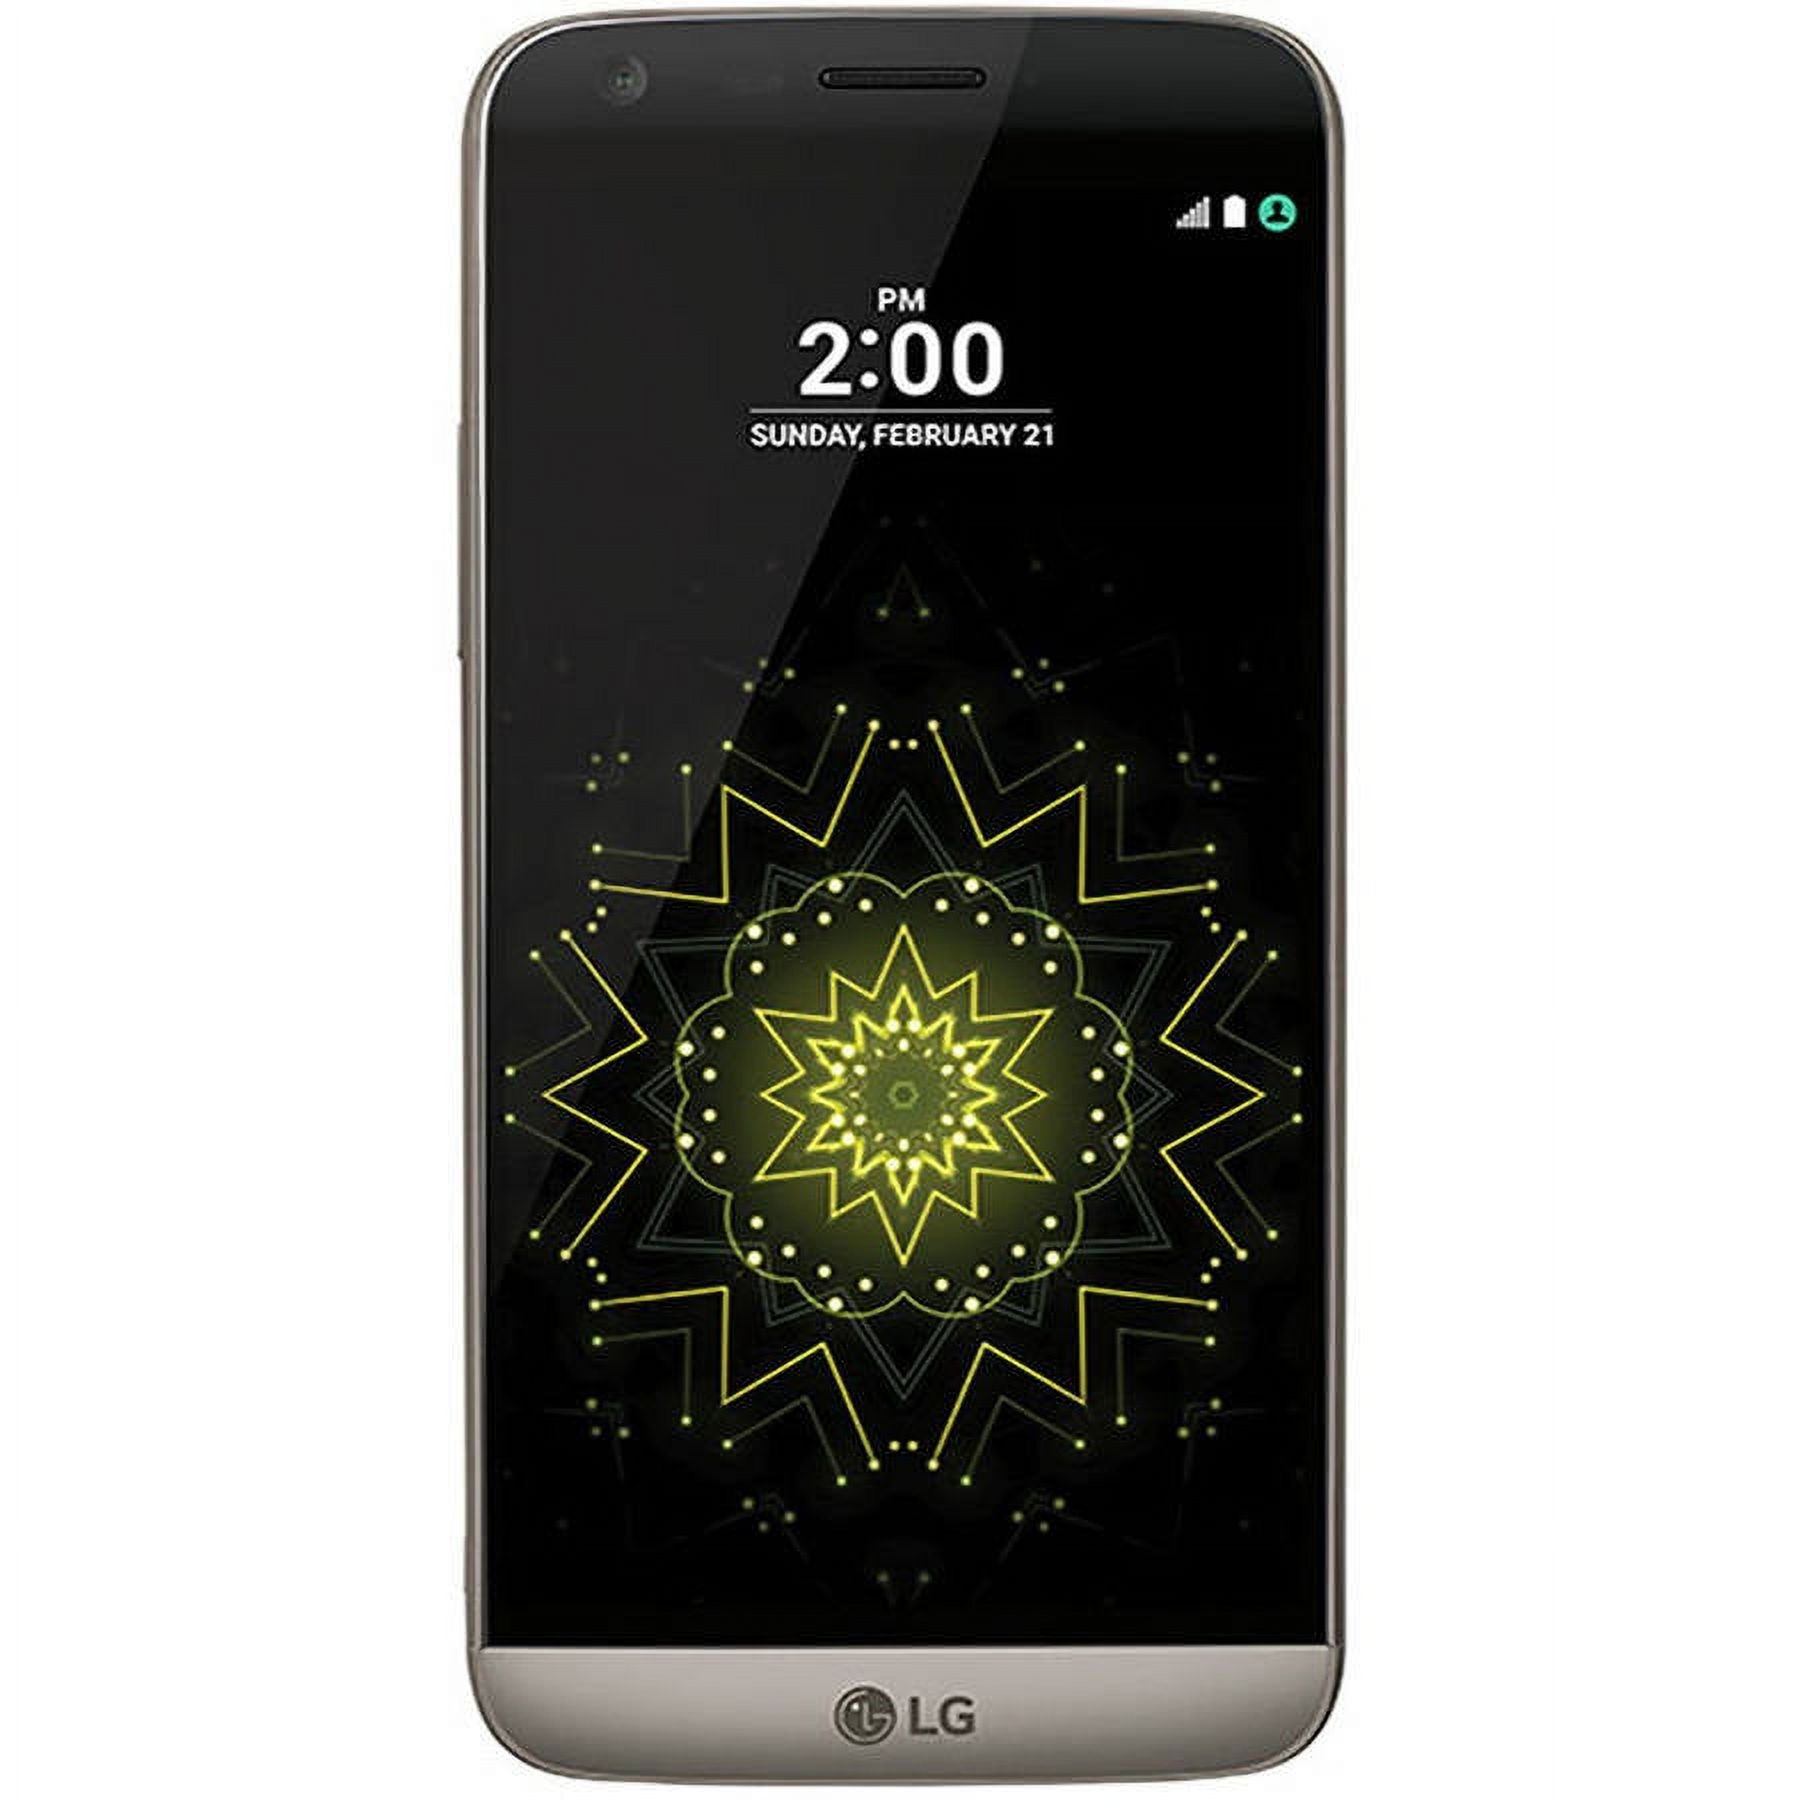 LG G5 RS988 32GB Unlocked GSM 4G LTE Quad-Core Android Phone w/ 16 MP Camera - Black - image 1 of 6